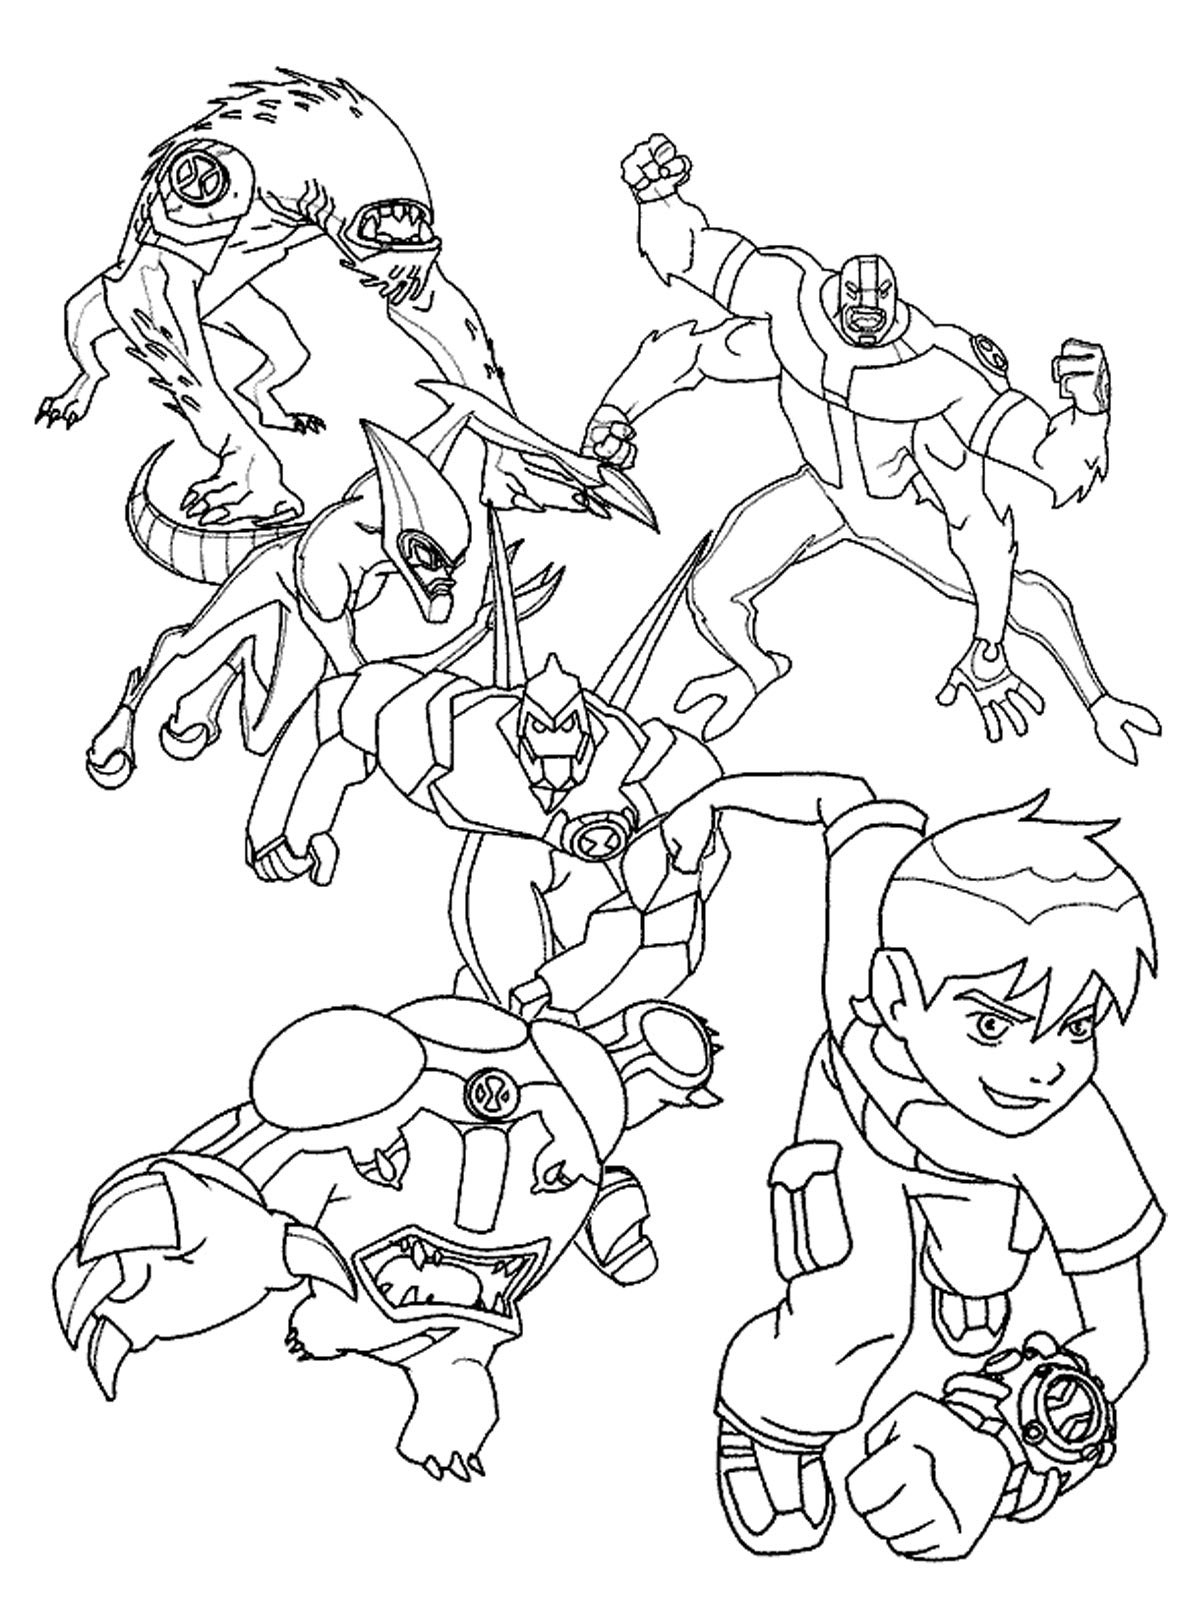 Ben 10 Coloring pages. Download or Print for free, 130 images